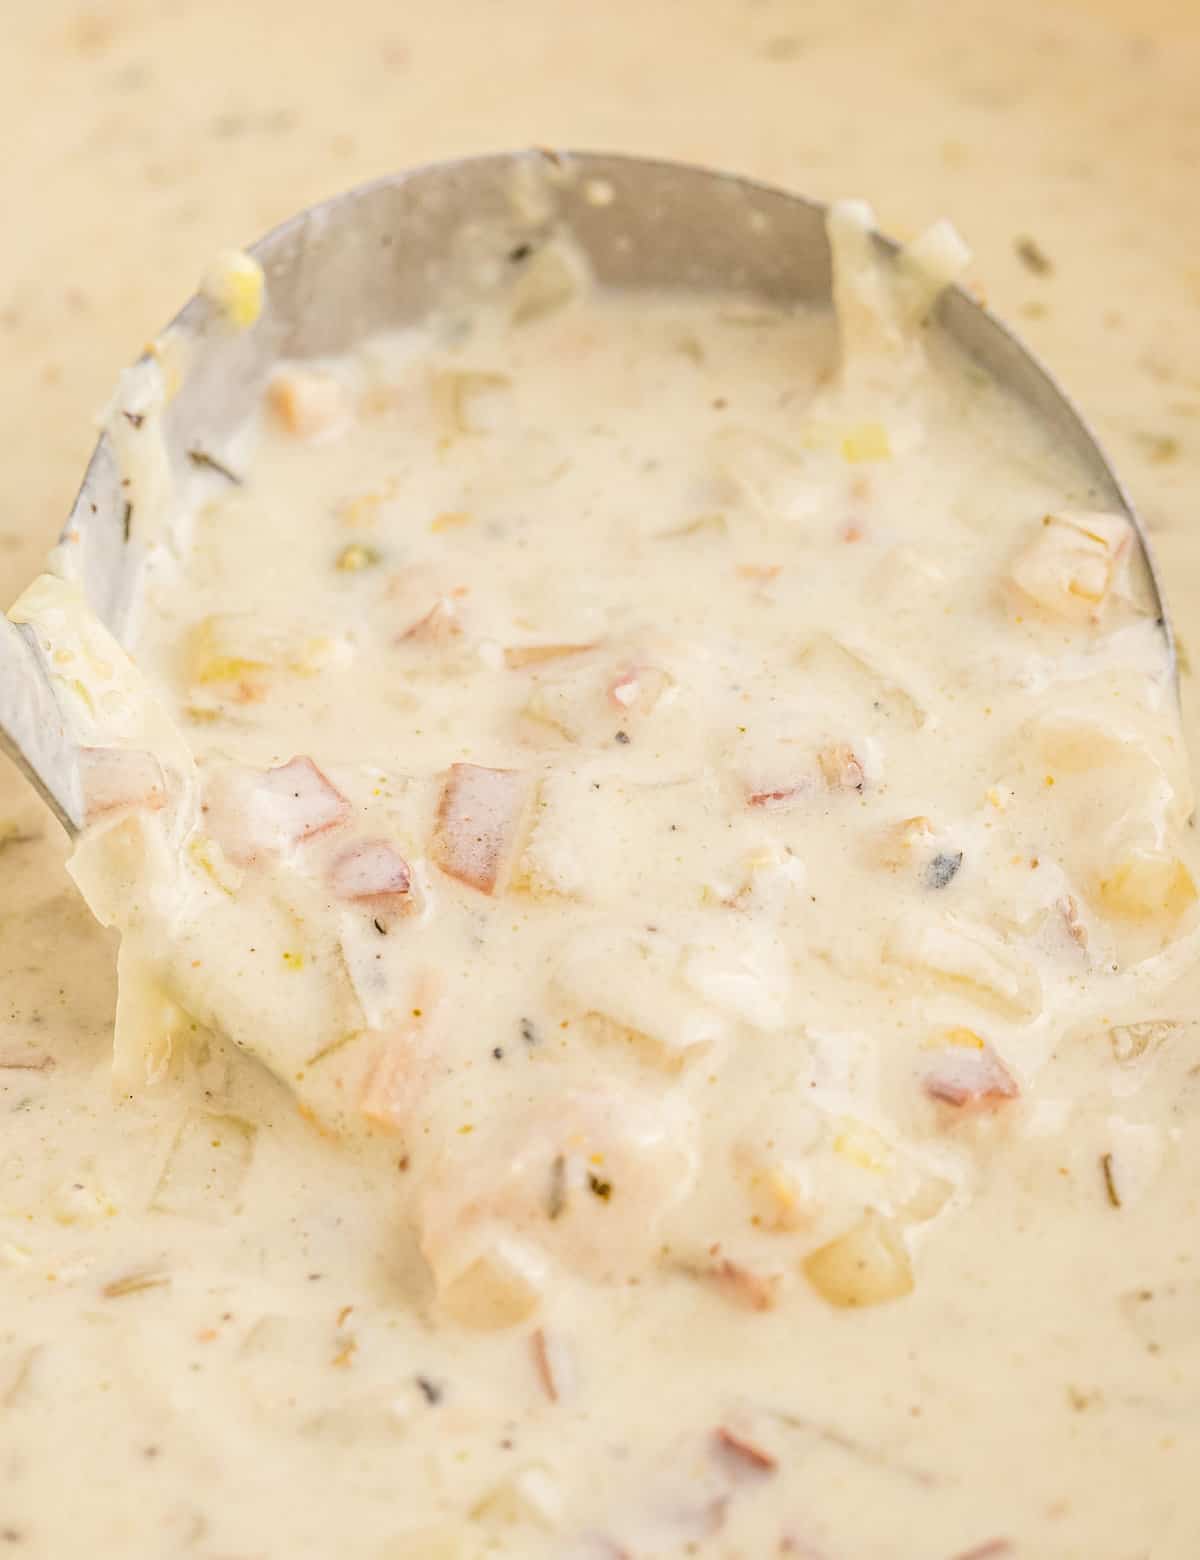 https://www.thechunkychef.com/wp-content/uploads/2023/01/Creamy-New-England-Style-Clam-Chowder-feat.jpg